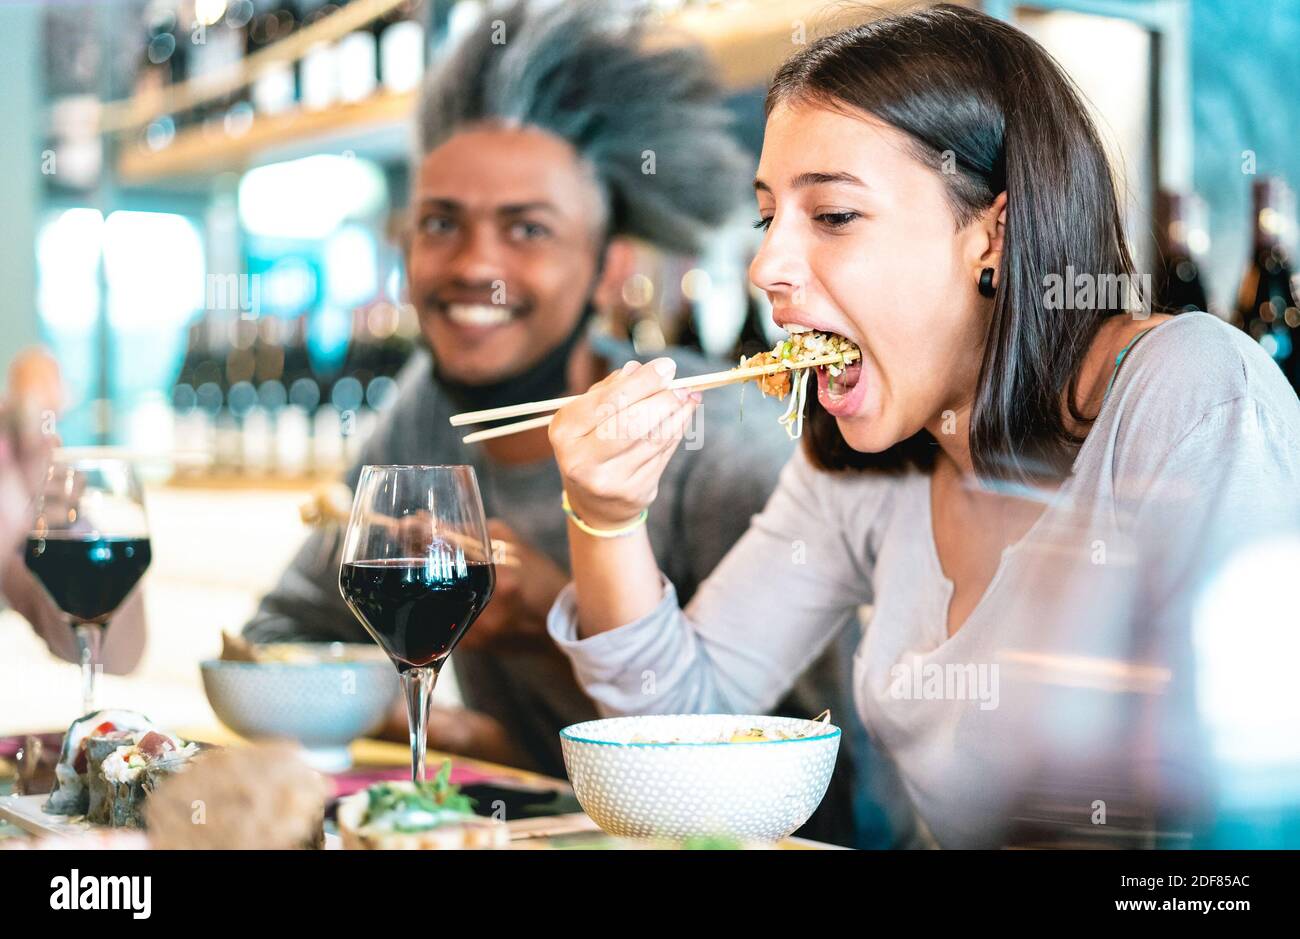 Happy couple eating poke bowl at sushi bar restaurant - Food lifestyle concept with young people having fun together at all you can eat buffet Stock Photo